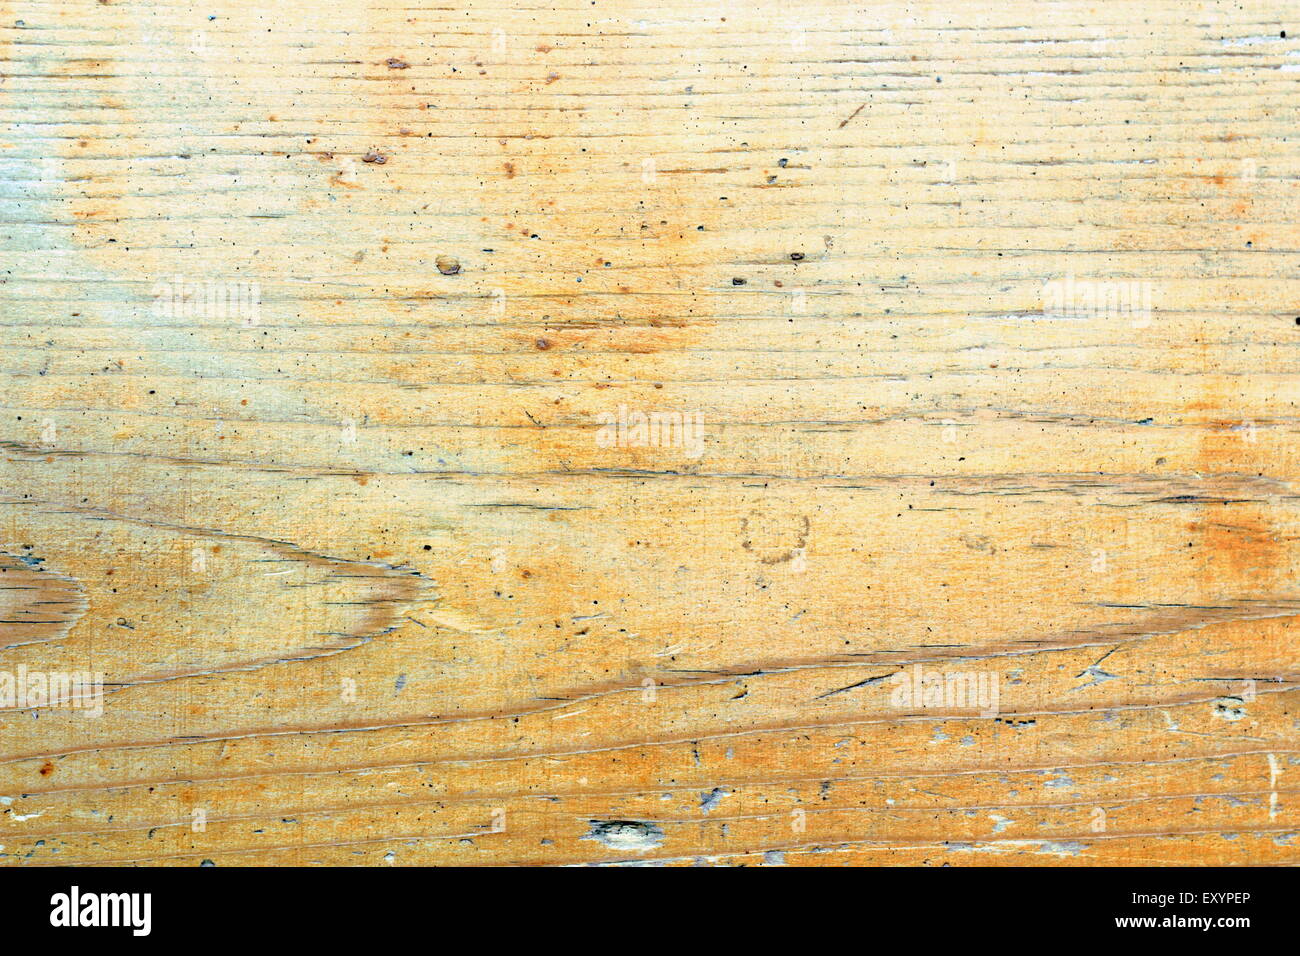 textured grungy wood on an old damaged table Stock Photo